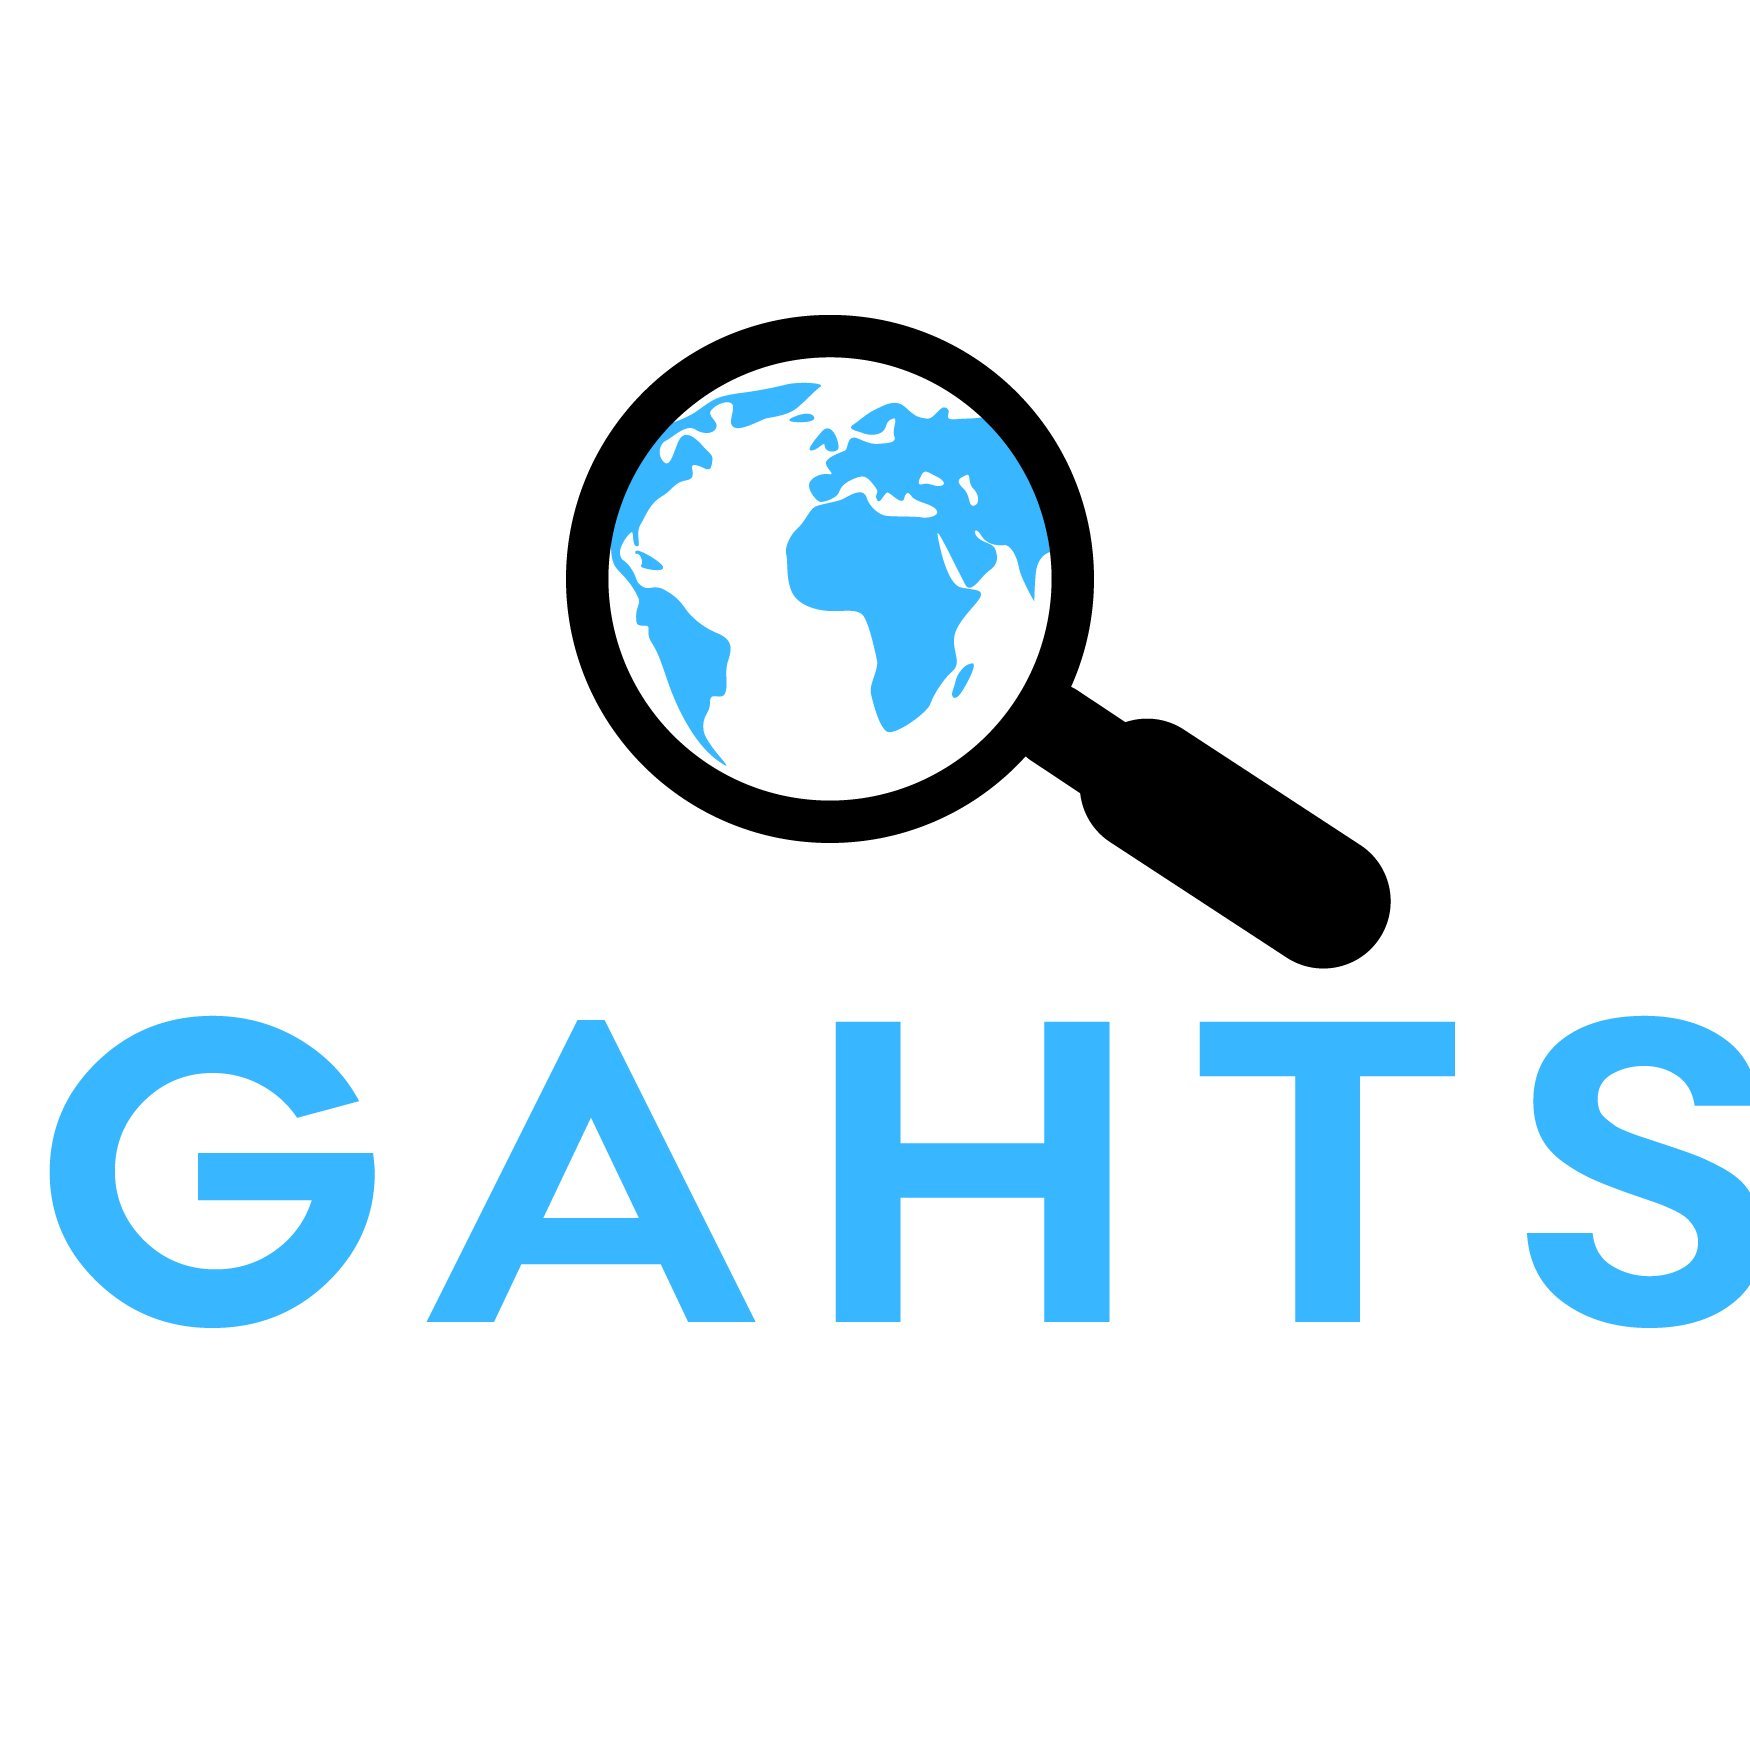 The Global Association of Human Trafficking Scholars (GAHTS) mission is to respond to human trafficking by moving the knowledge base forward.